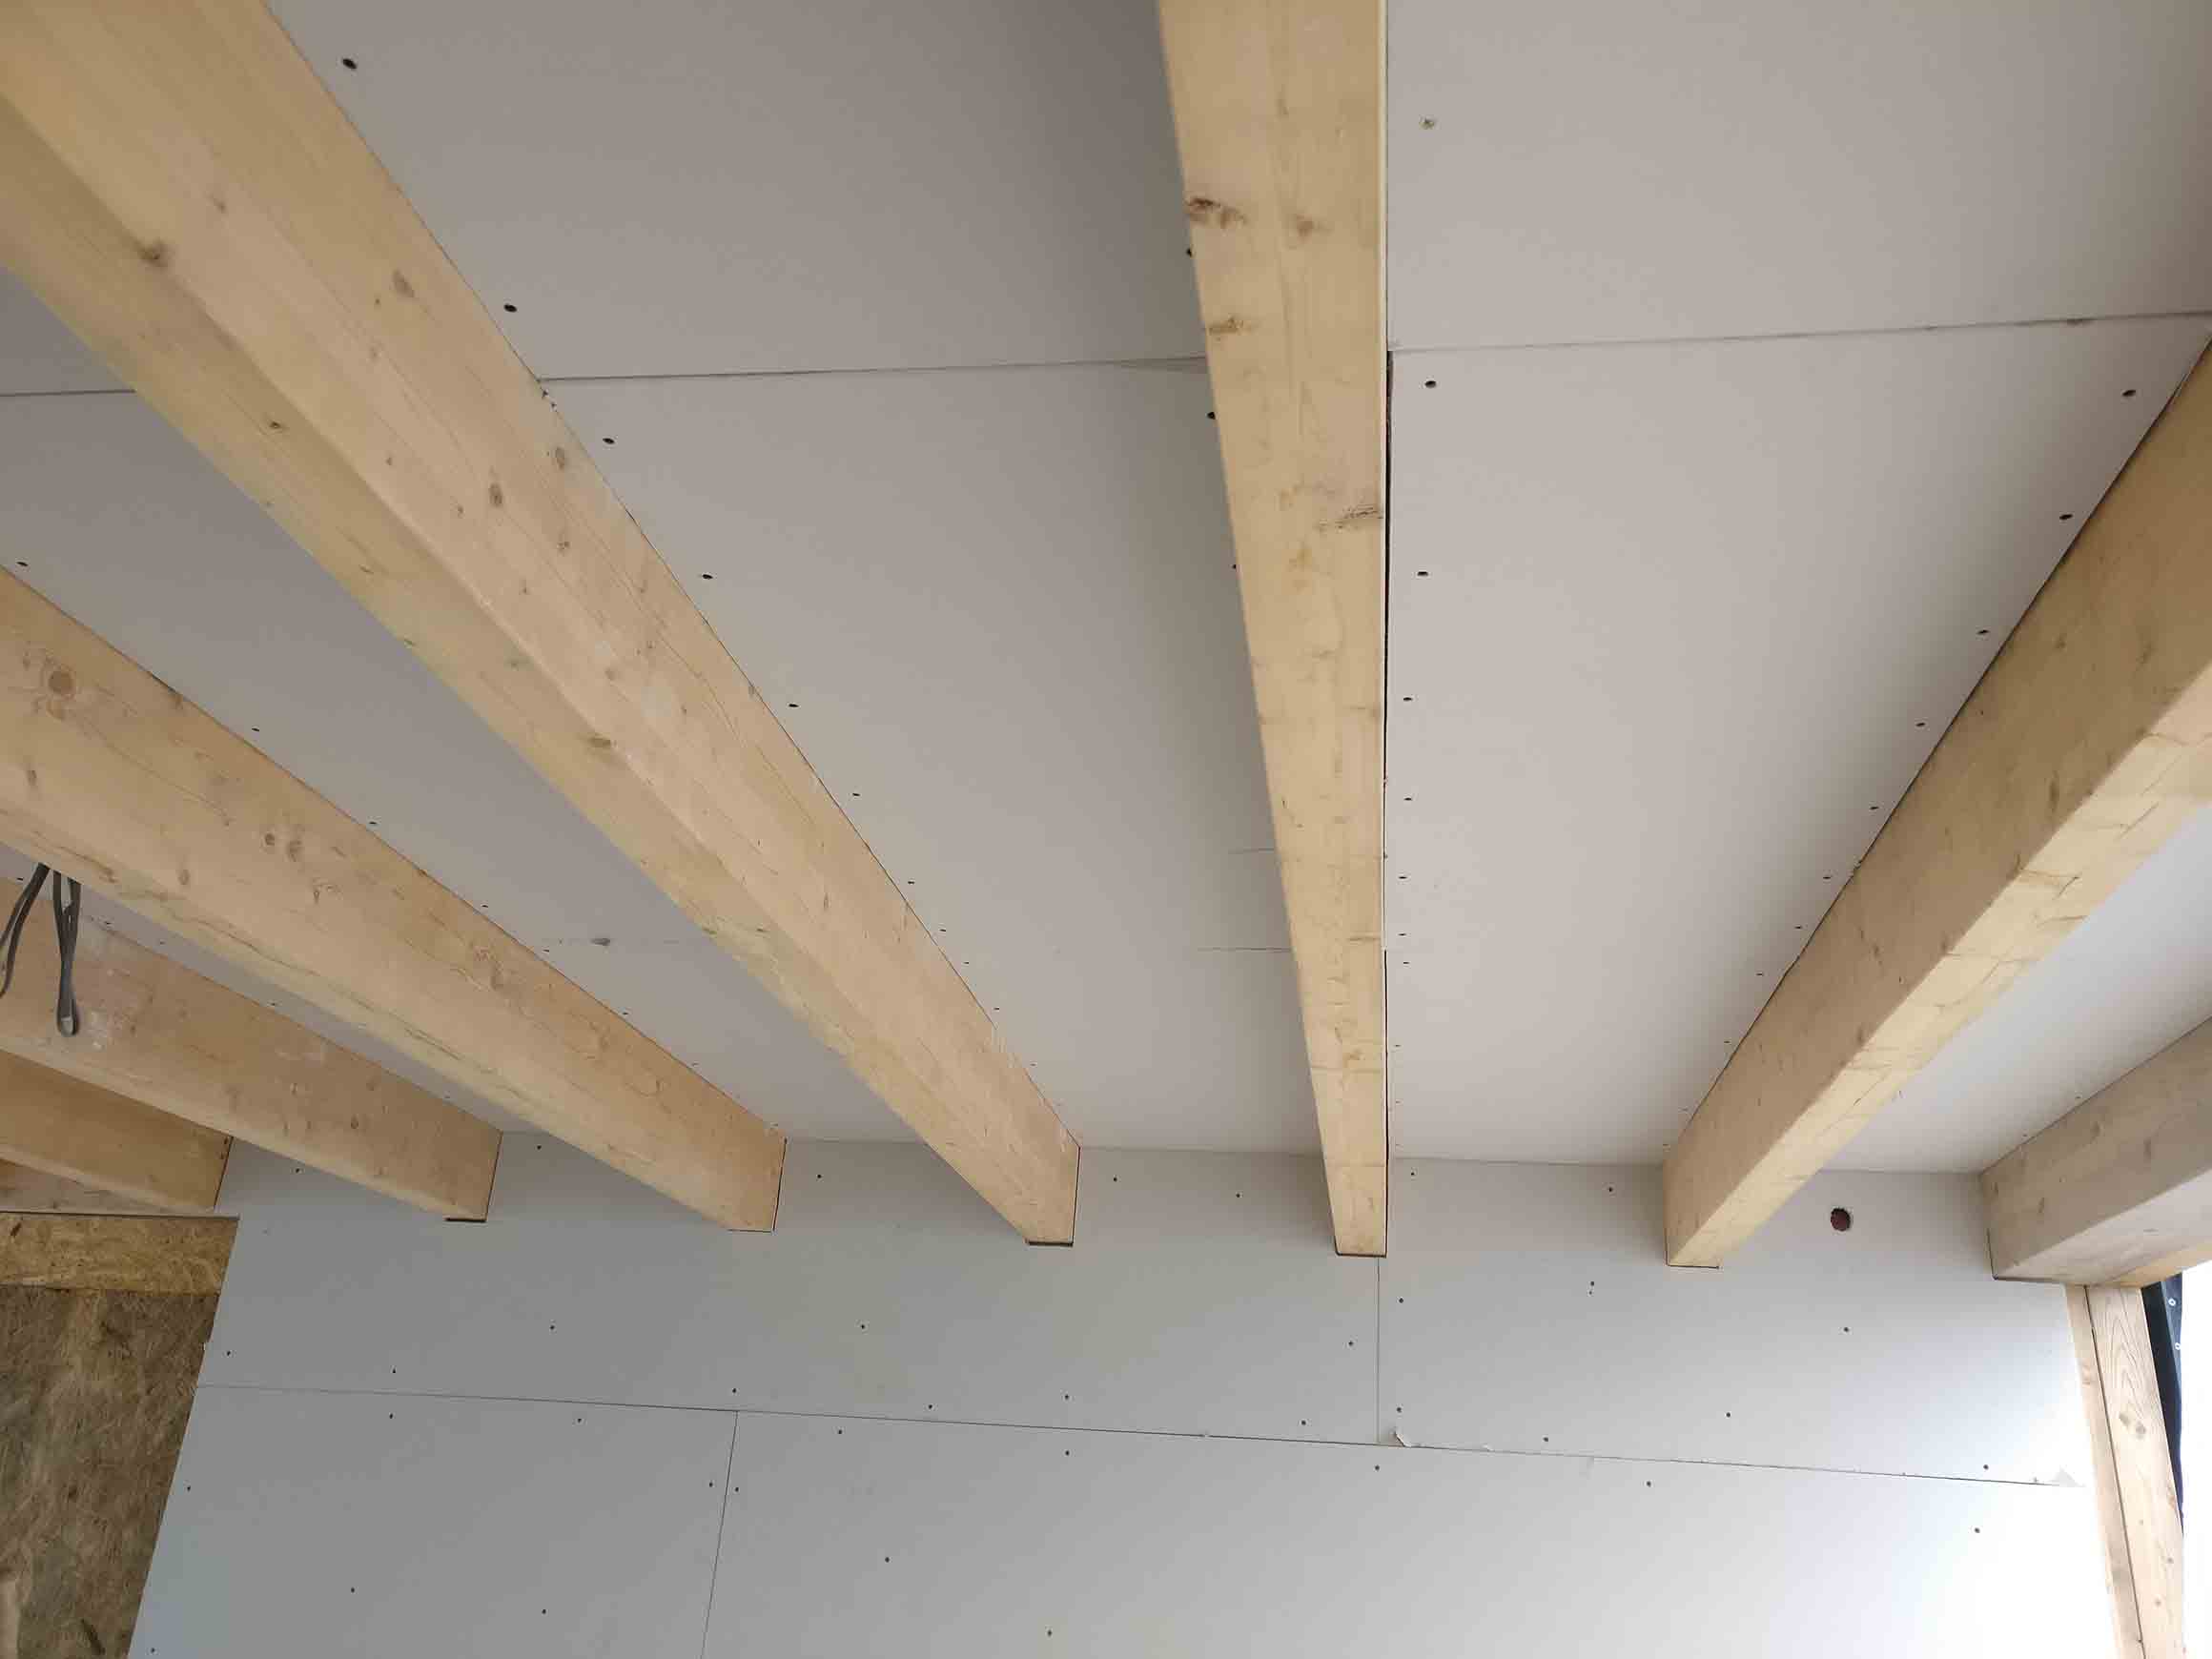 Gluelam beams installed and boarded